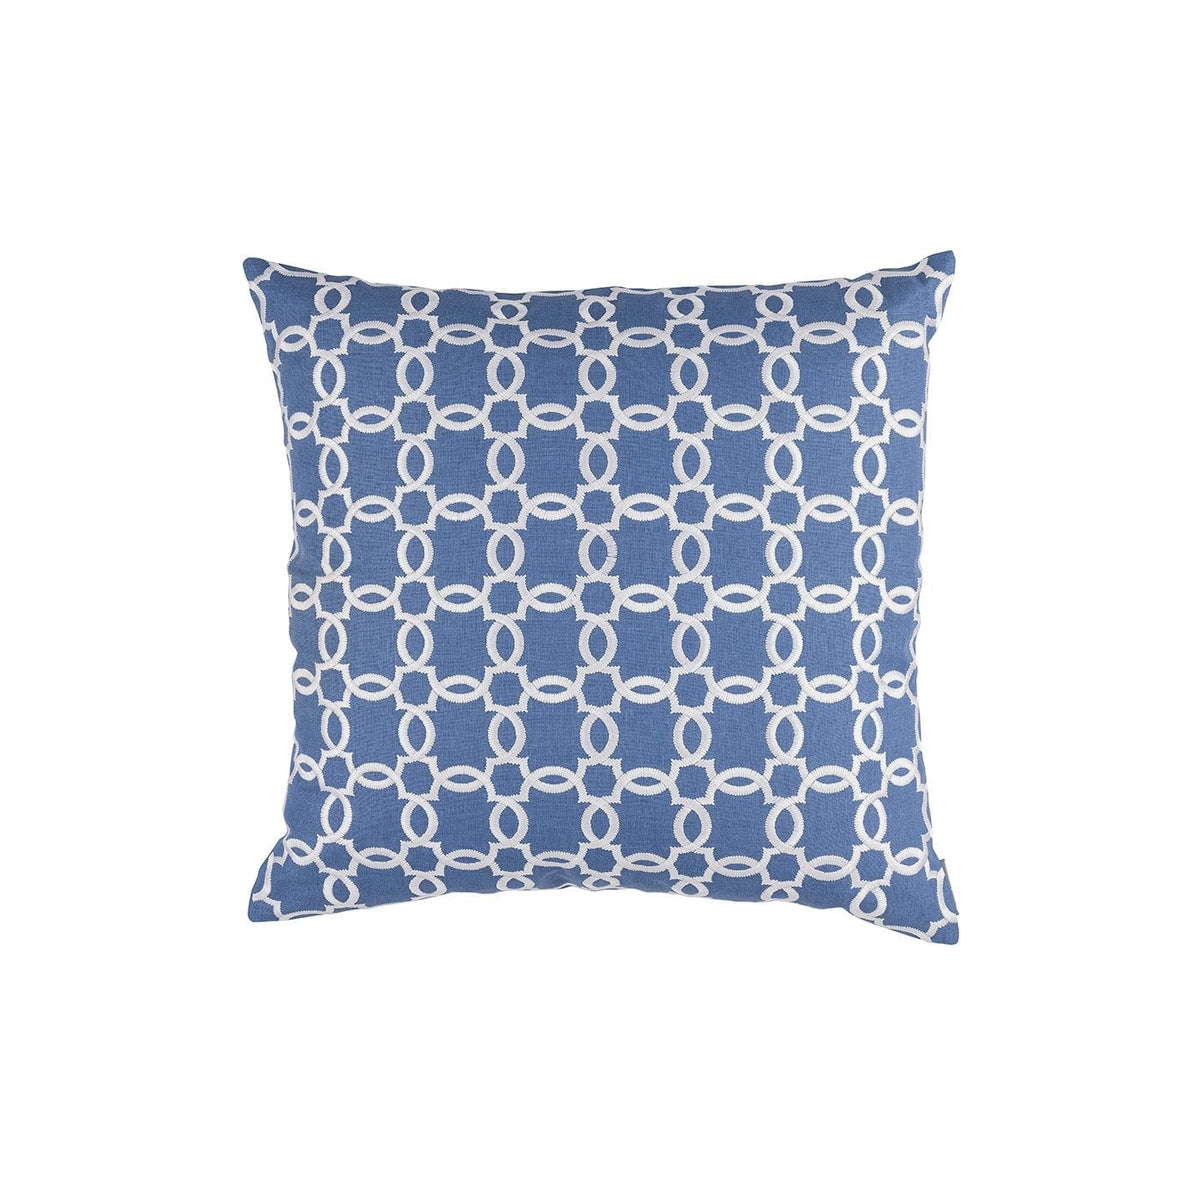 Lynx Azure &amp; White Decorative Pillow by Lili Alessandra | Fig Linens